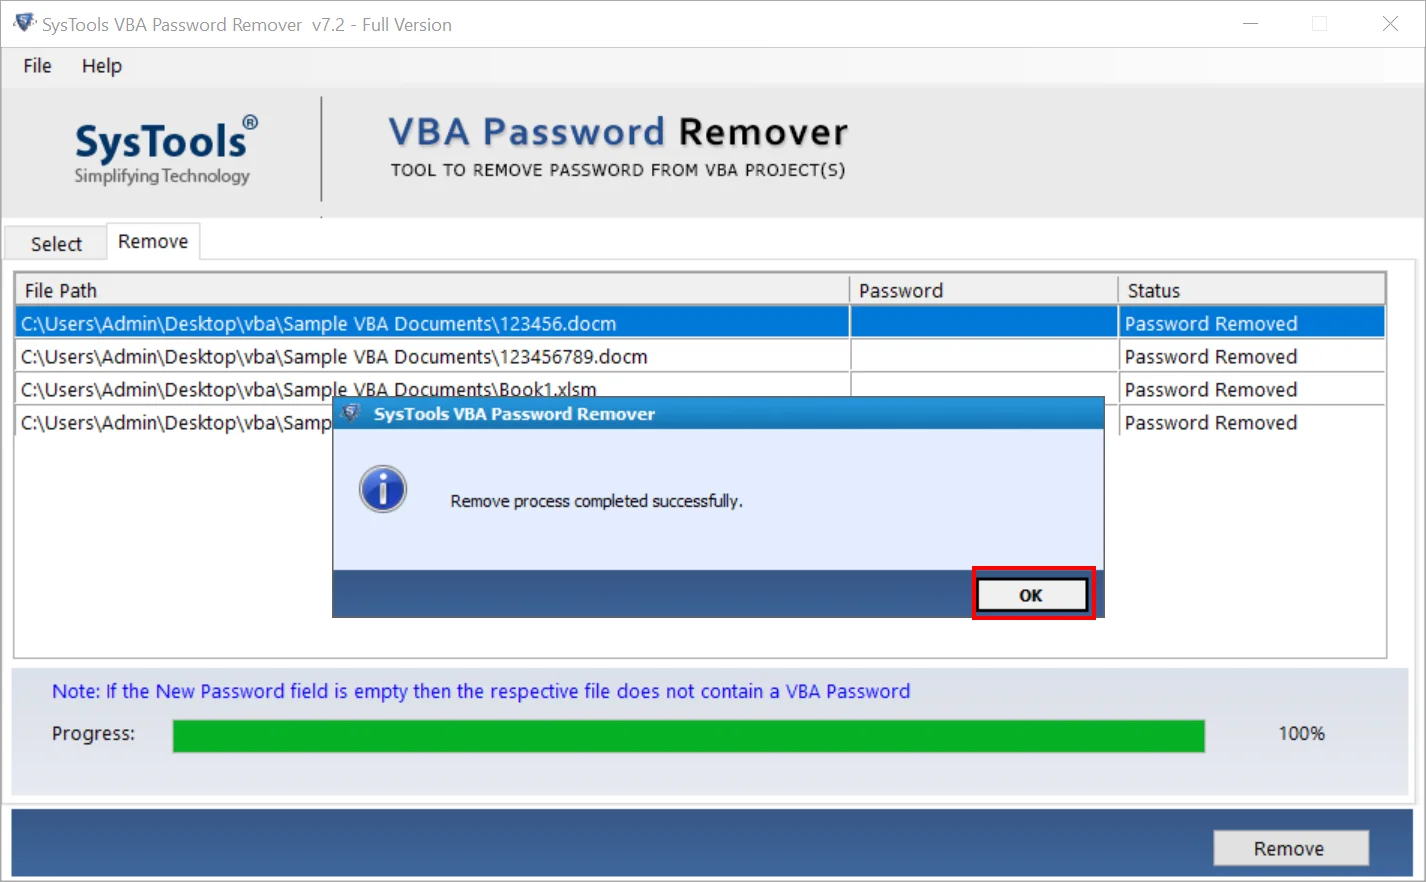 remove the password of the added VBA file